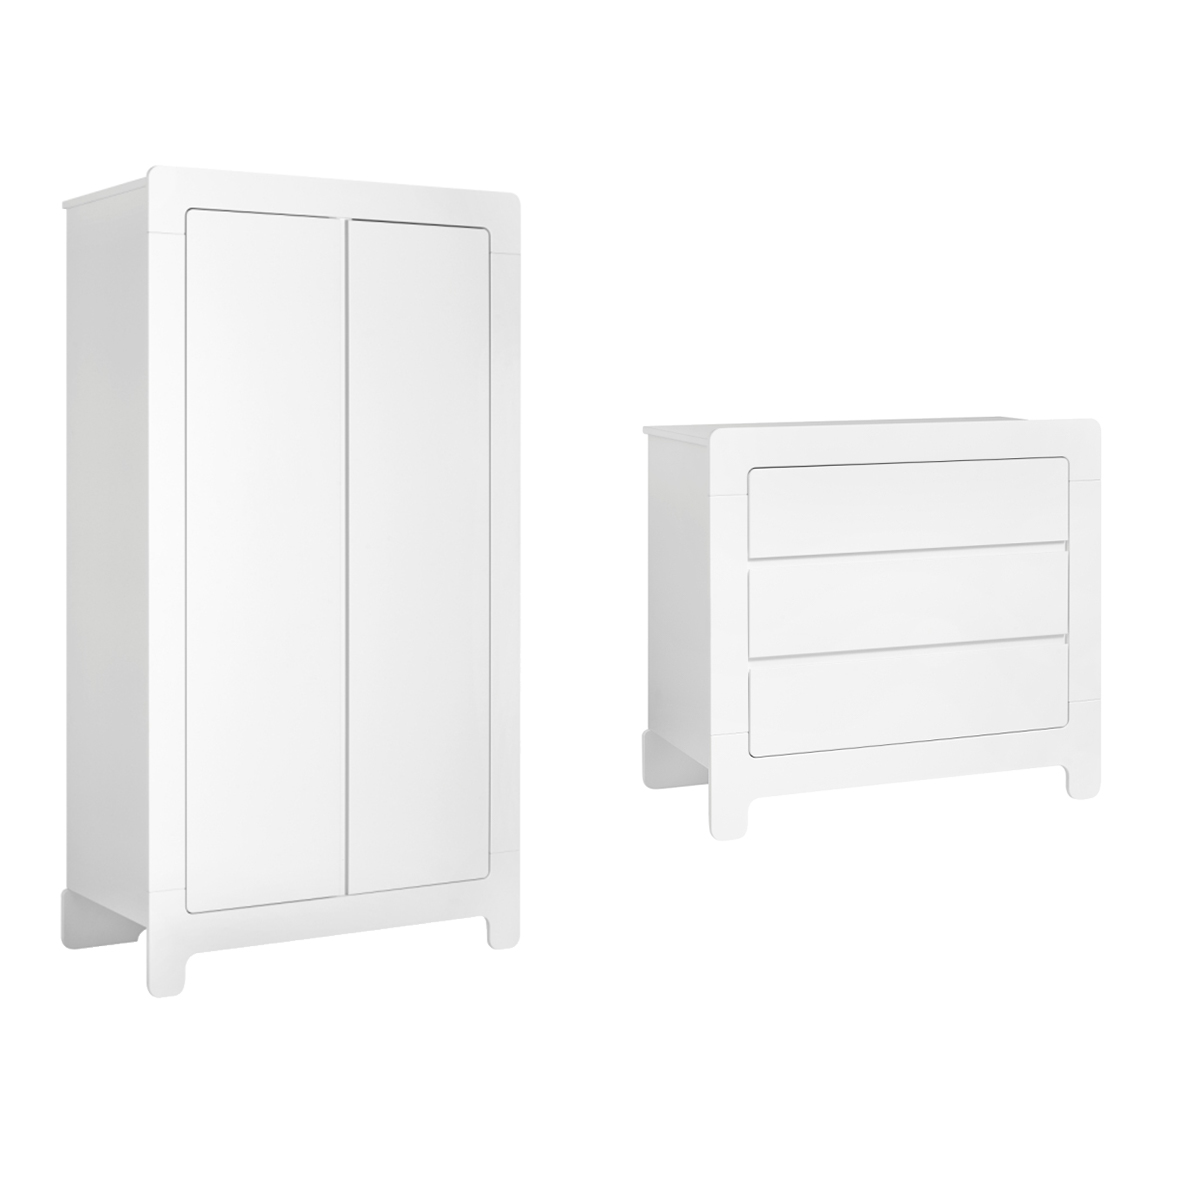 pinio_moon_pack_armoire_commode